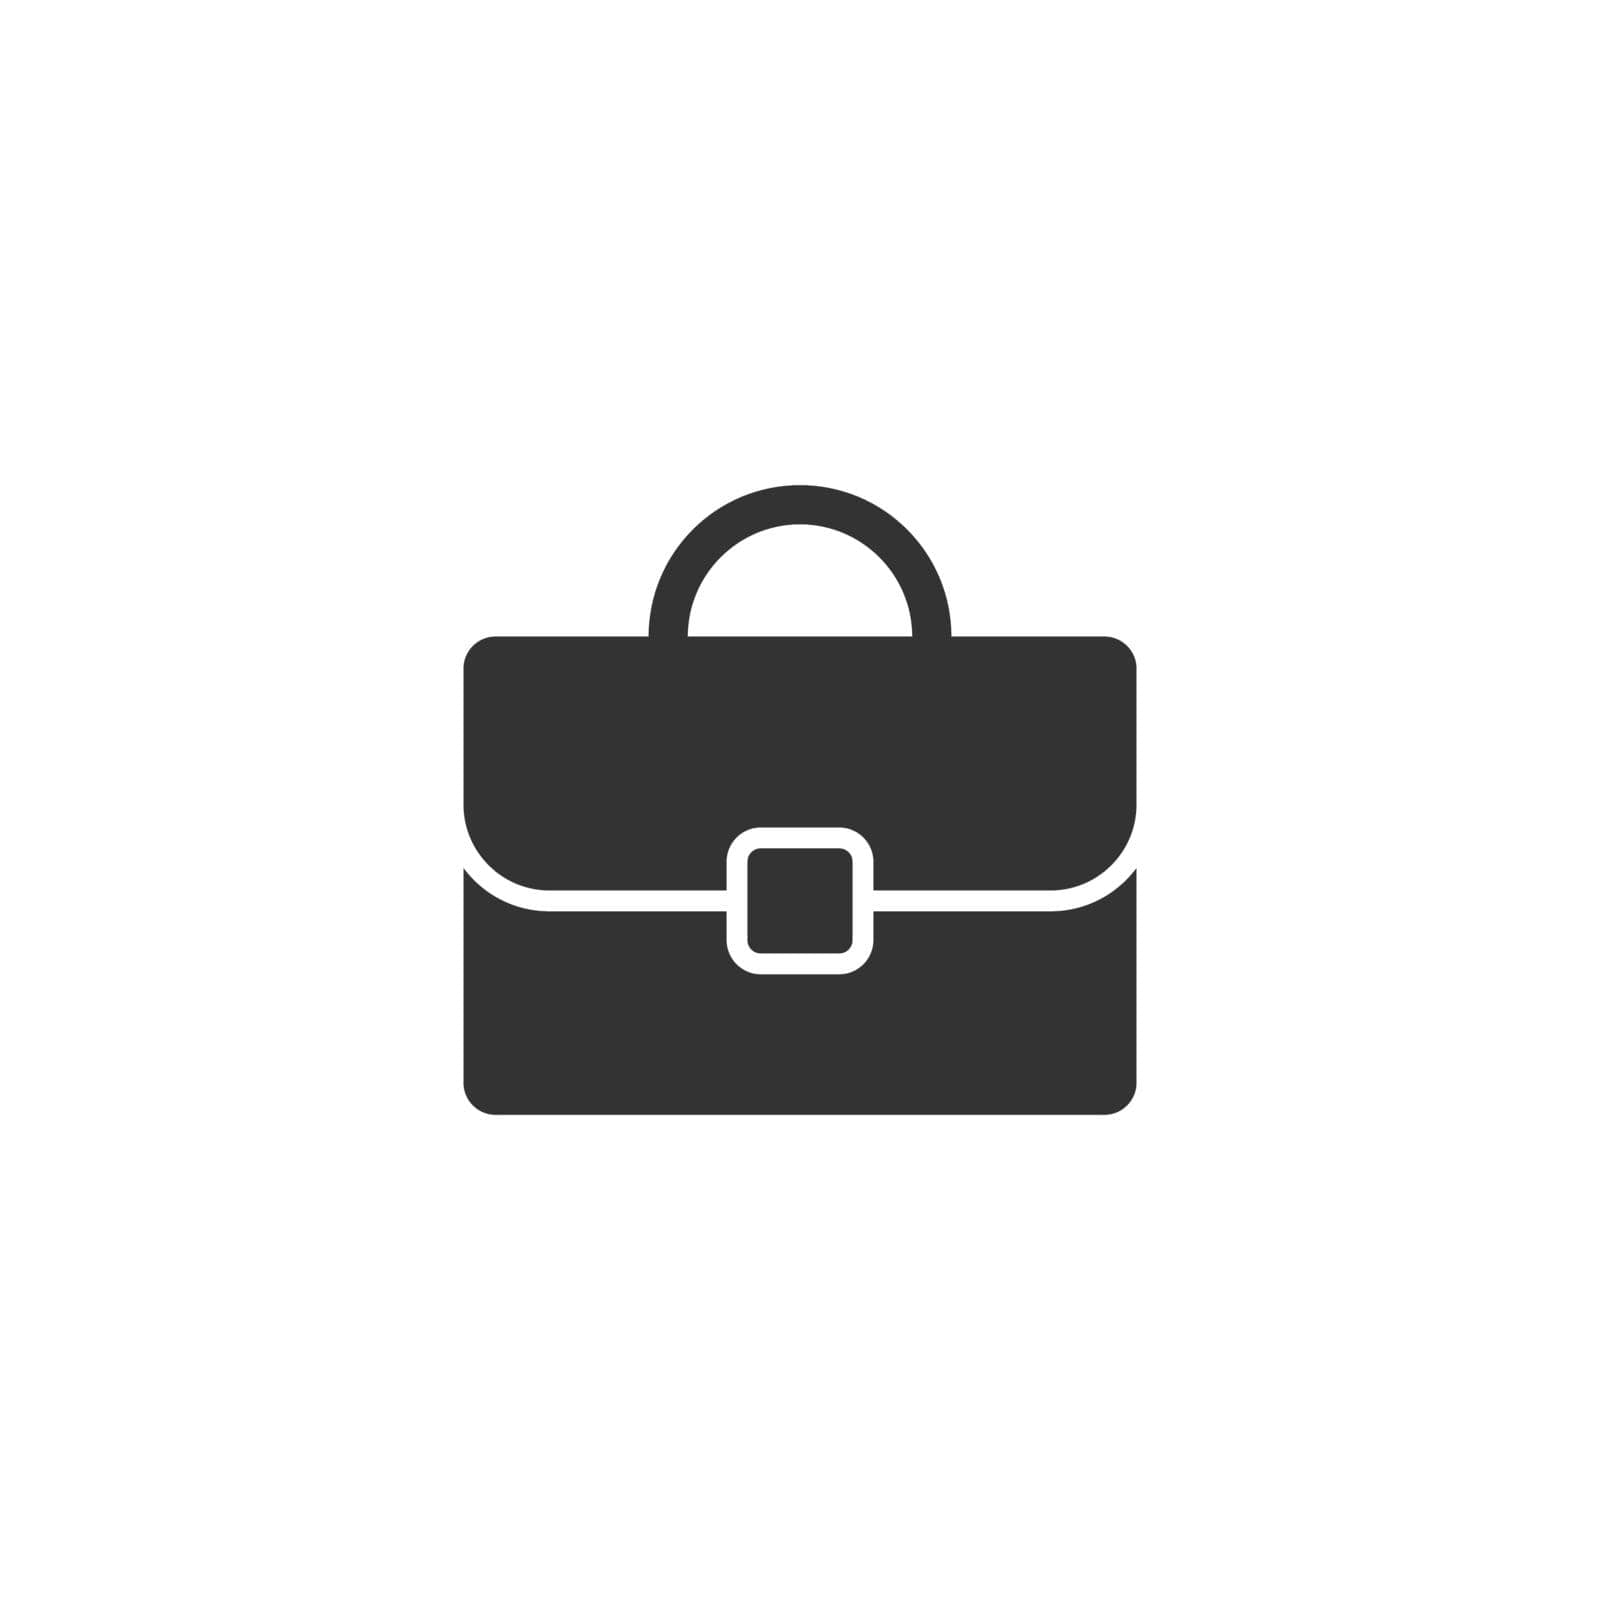 Briefcase icon in flat style. Businessman bag vector illustration on white isolated background. Portfolio business concept.